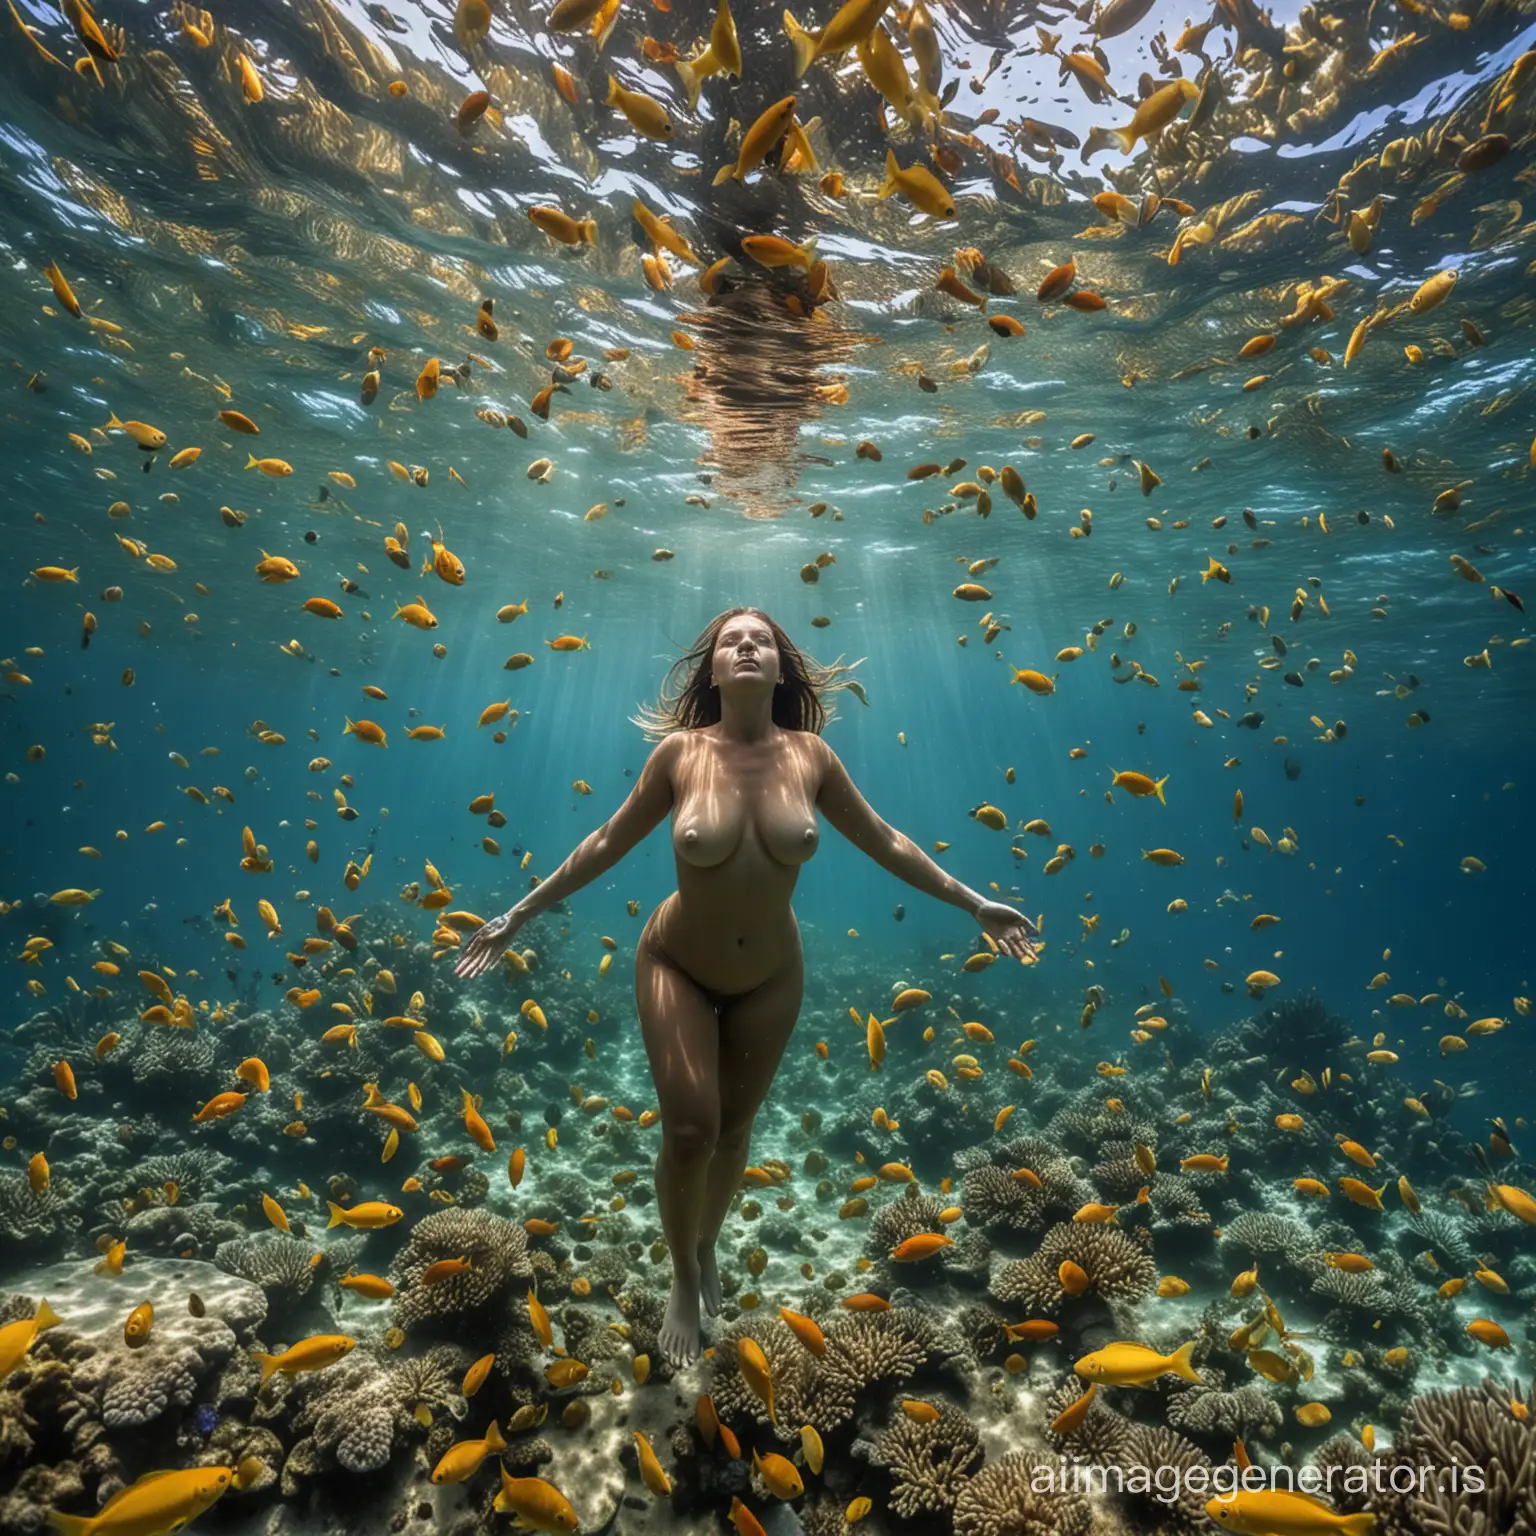 a photo of a nude swimmer taken from below, she is plump with very generous curves, the photo is taken underwater in the Indian Ocean with many fish of different colors: yellow fish, blue fish, orange fish, green fish, red fish, presence of coral and algae, sea anemones